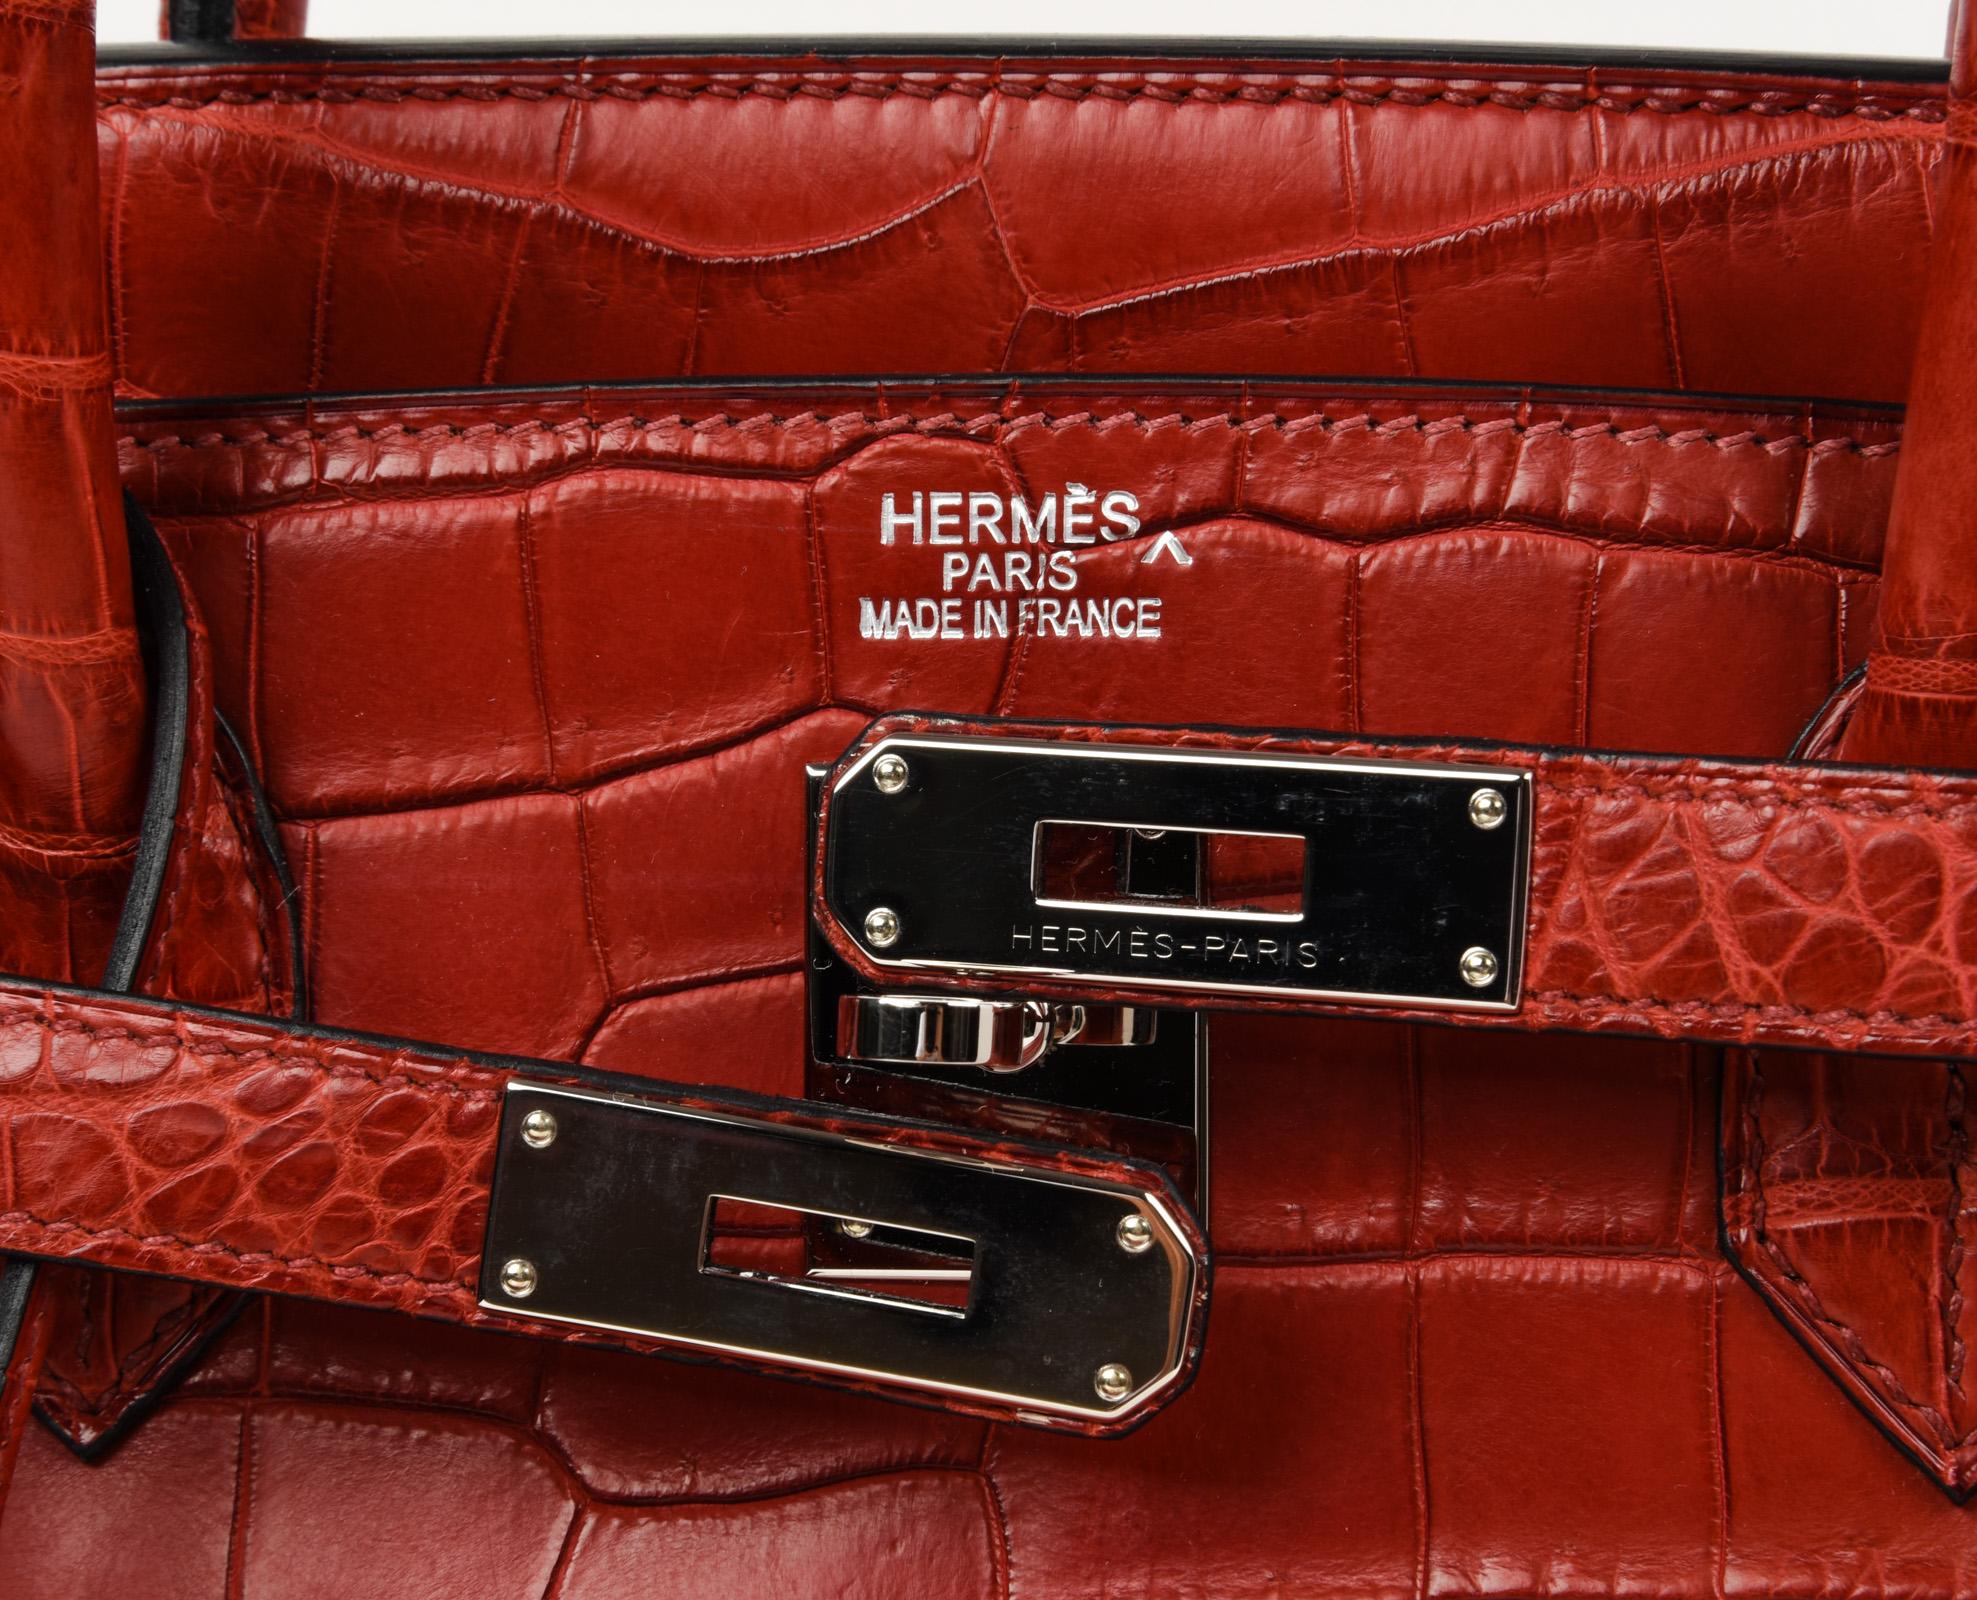 Guaranteed authentic Hermes Birkin 40 bag features rare coveted Matte red Porosus Crocodile. 
Fresh palladium hardware.
Extremely light wear marks on corners.
Light marking on hardware.
Clean handles and body.
Clean interior.
Comes with lock, keys,